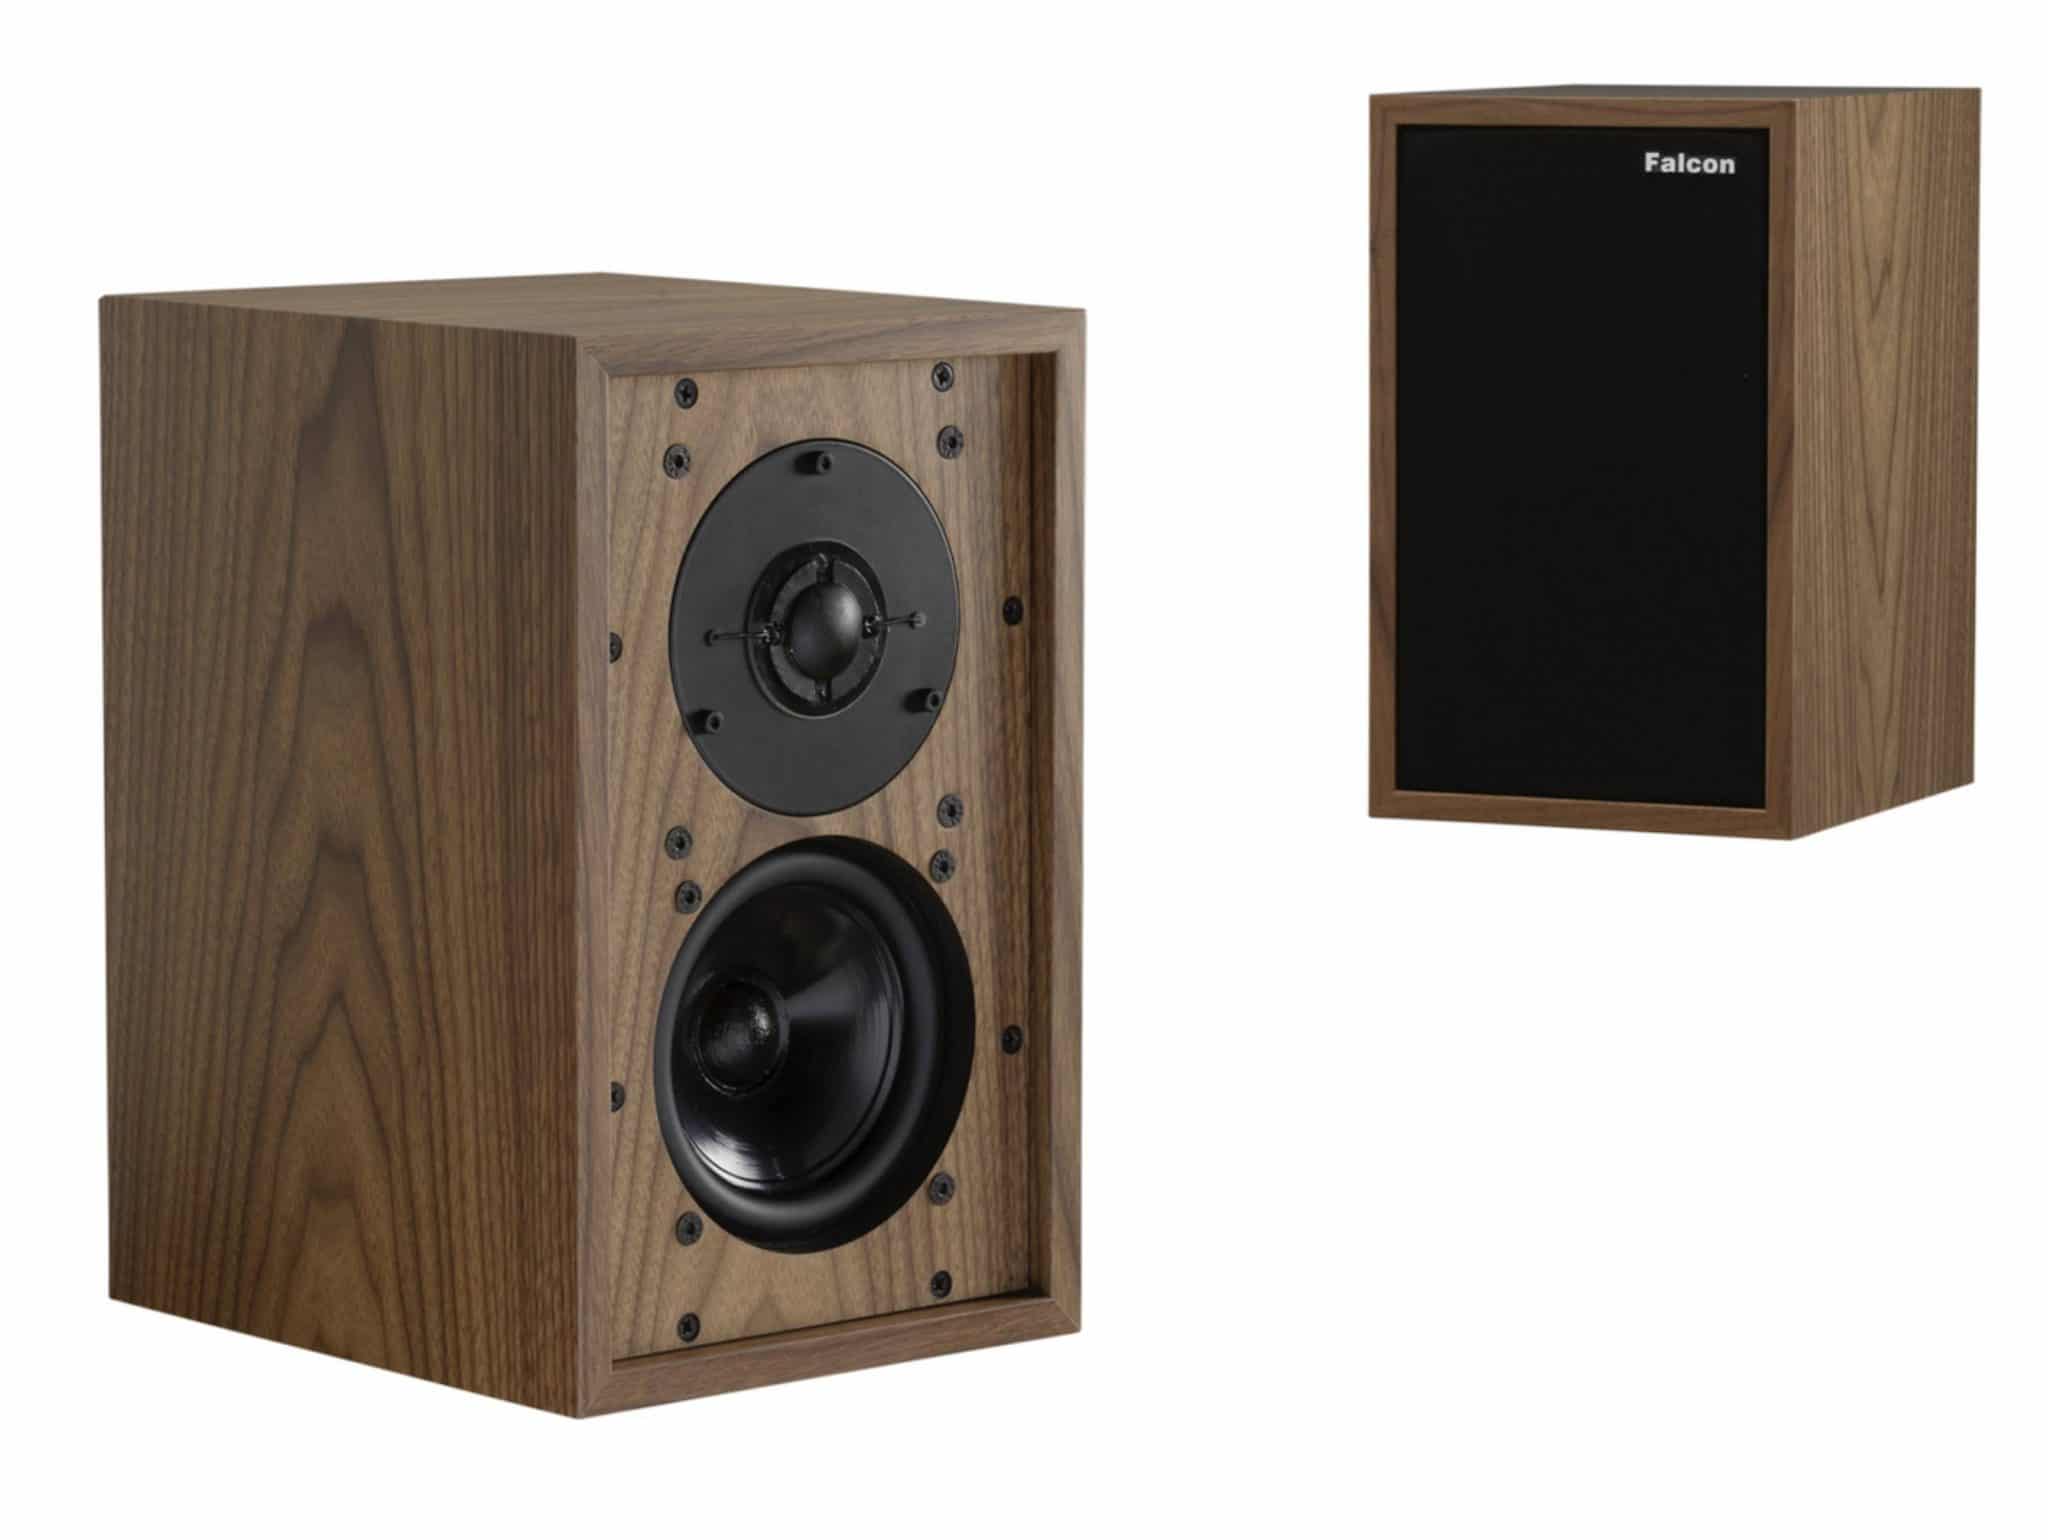 Two Hour Speaker Kit From Falcon Acoustics